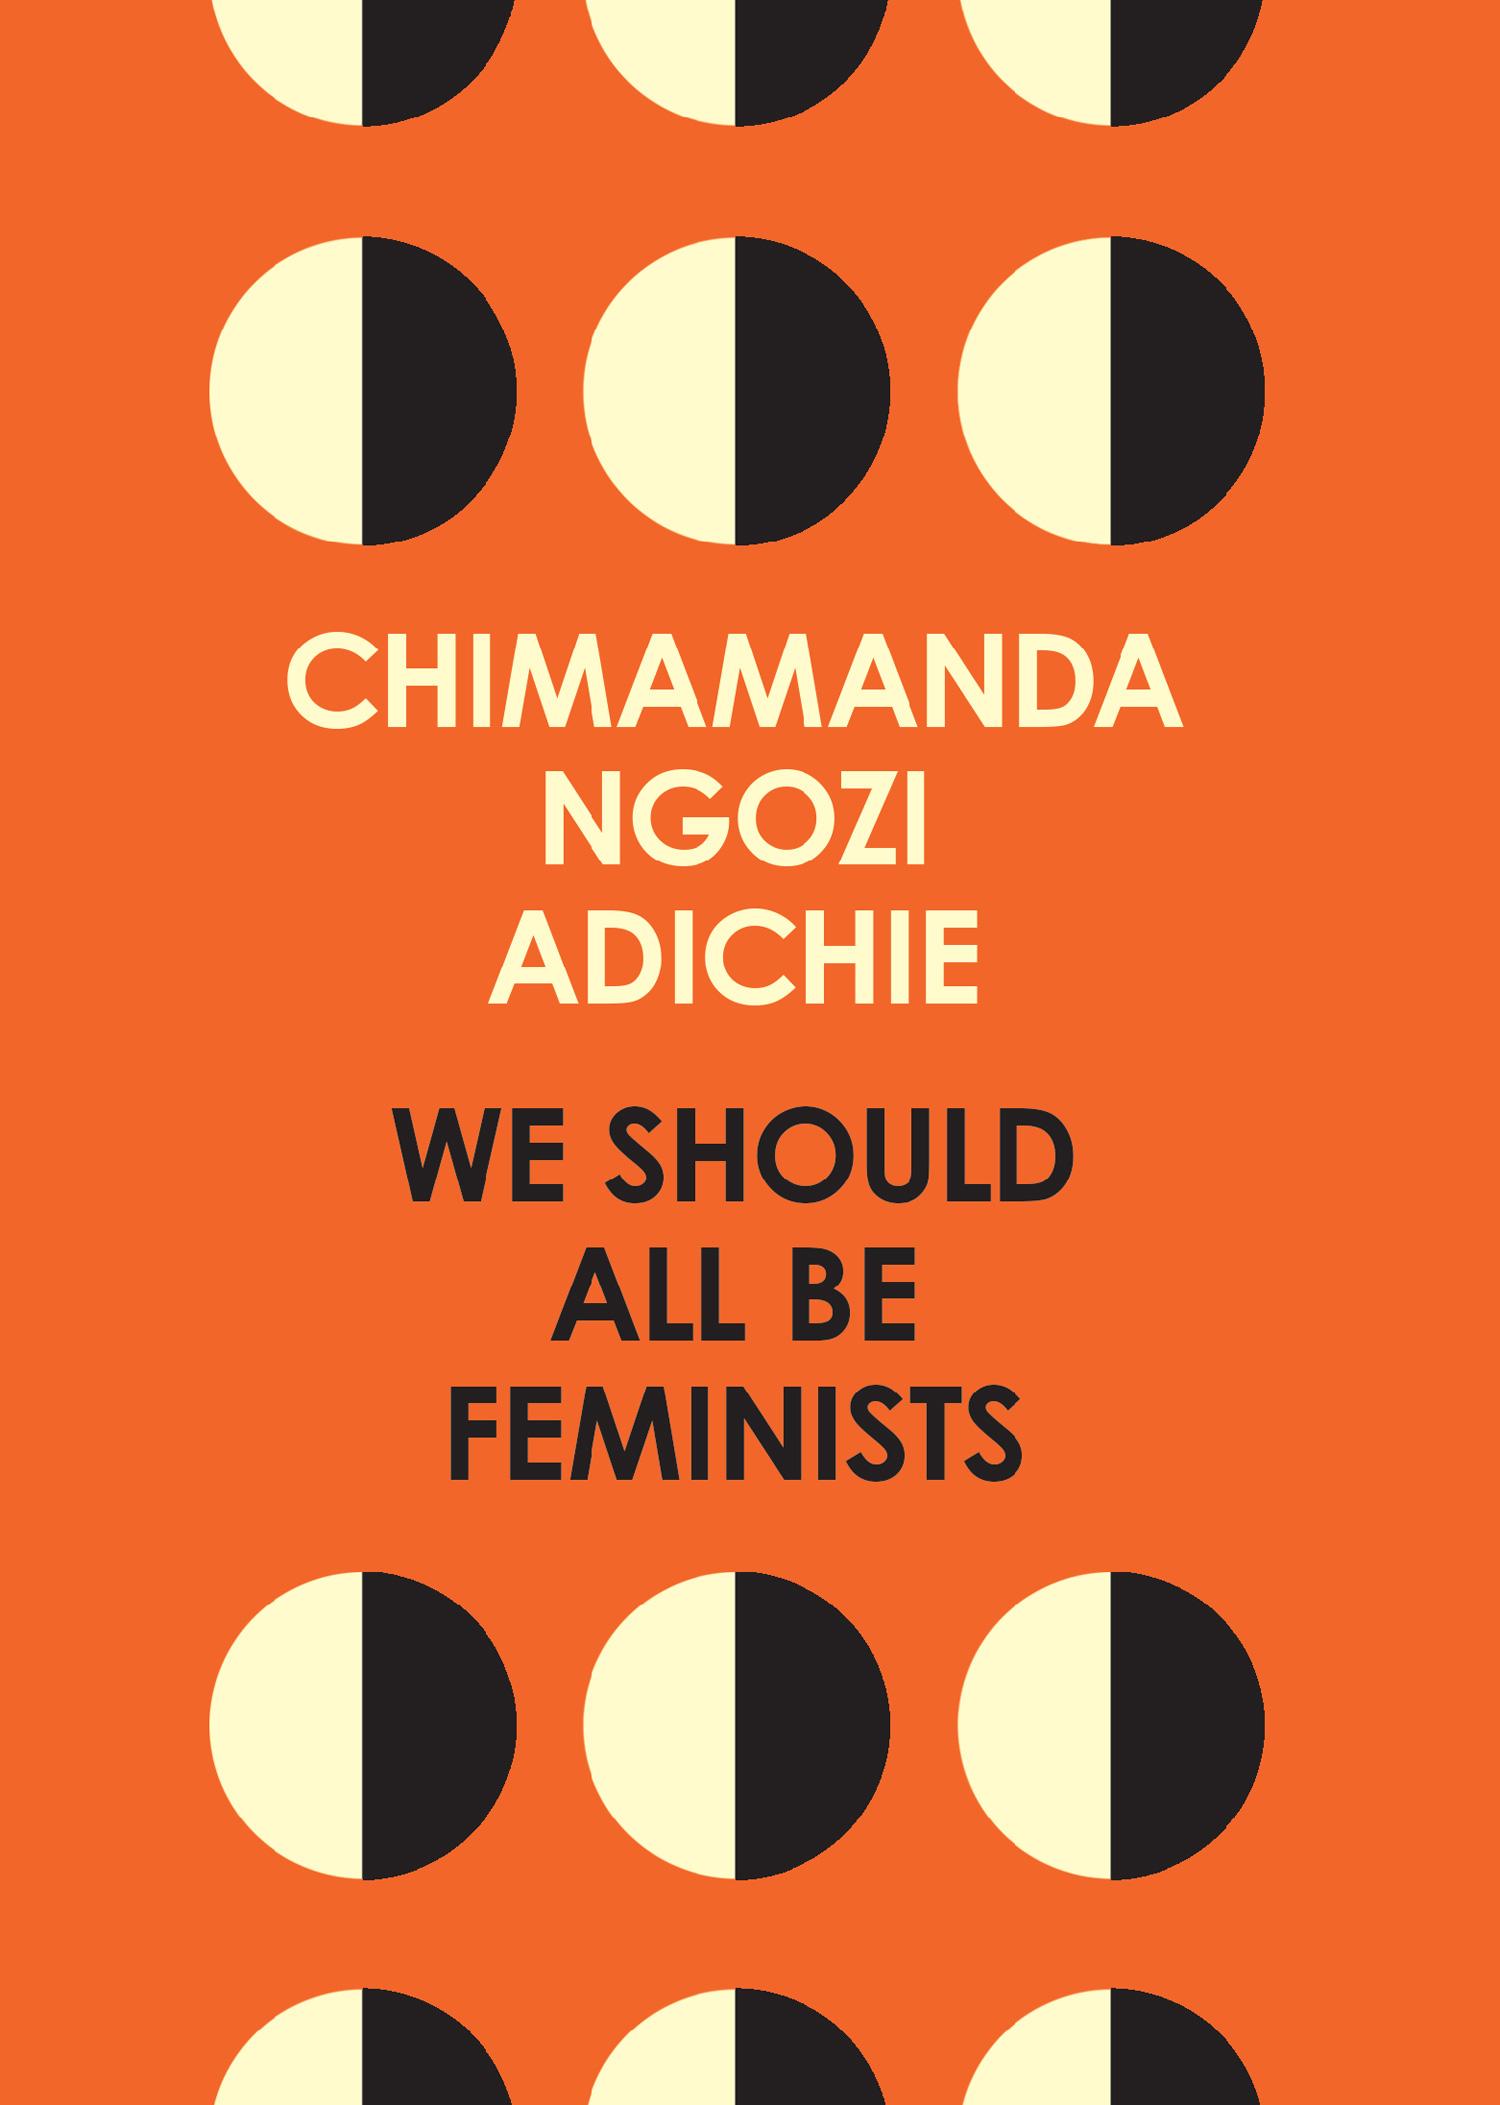 We Should All Be Feminists | Chimamanda Ngozi Adichie | Taschenbuch | 52 S. | Englisch | 2014 | Harper Collins Publ. UK | EAN 9780008115272 - Adichie, Chimamanda Ngozi